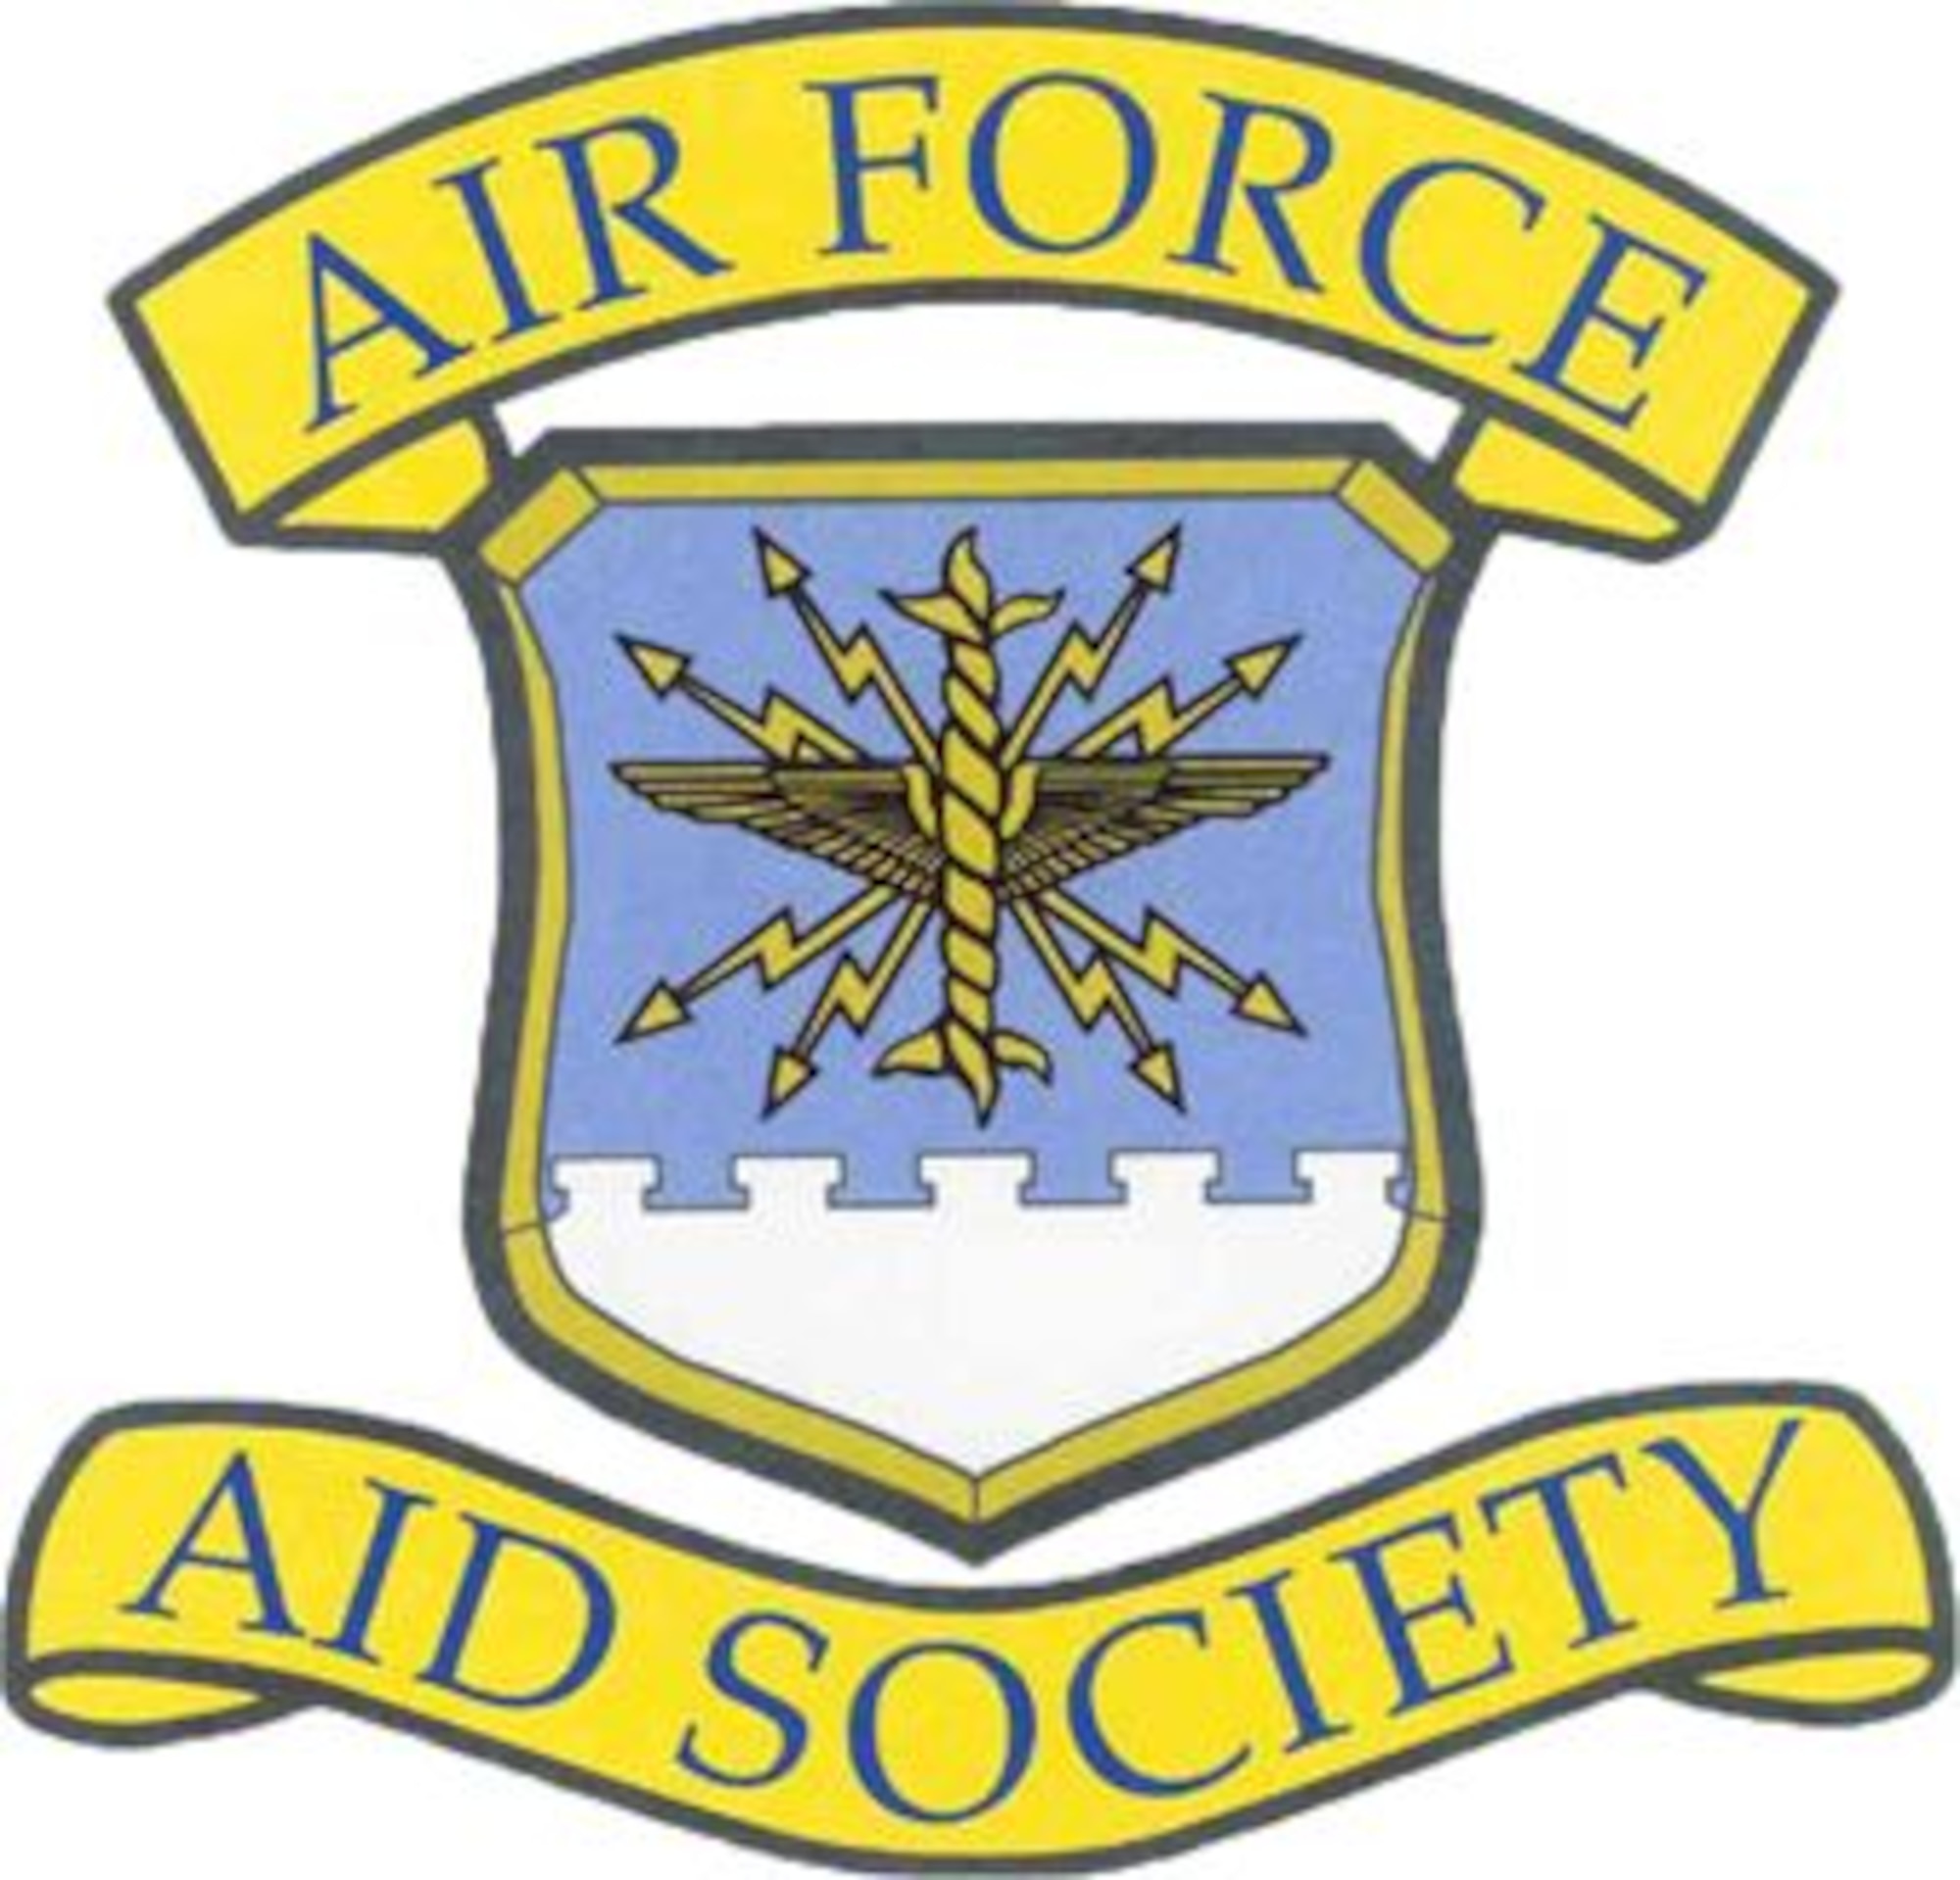 Since its inception in 1942, the Air Force Aid Society has been committed to helping Airmen and their families realize their academic goals through the an education grant program. The General Henry H. Arnold Education Grant Program which provides $2,000 grants to family members.